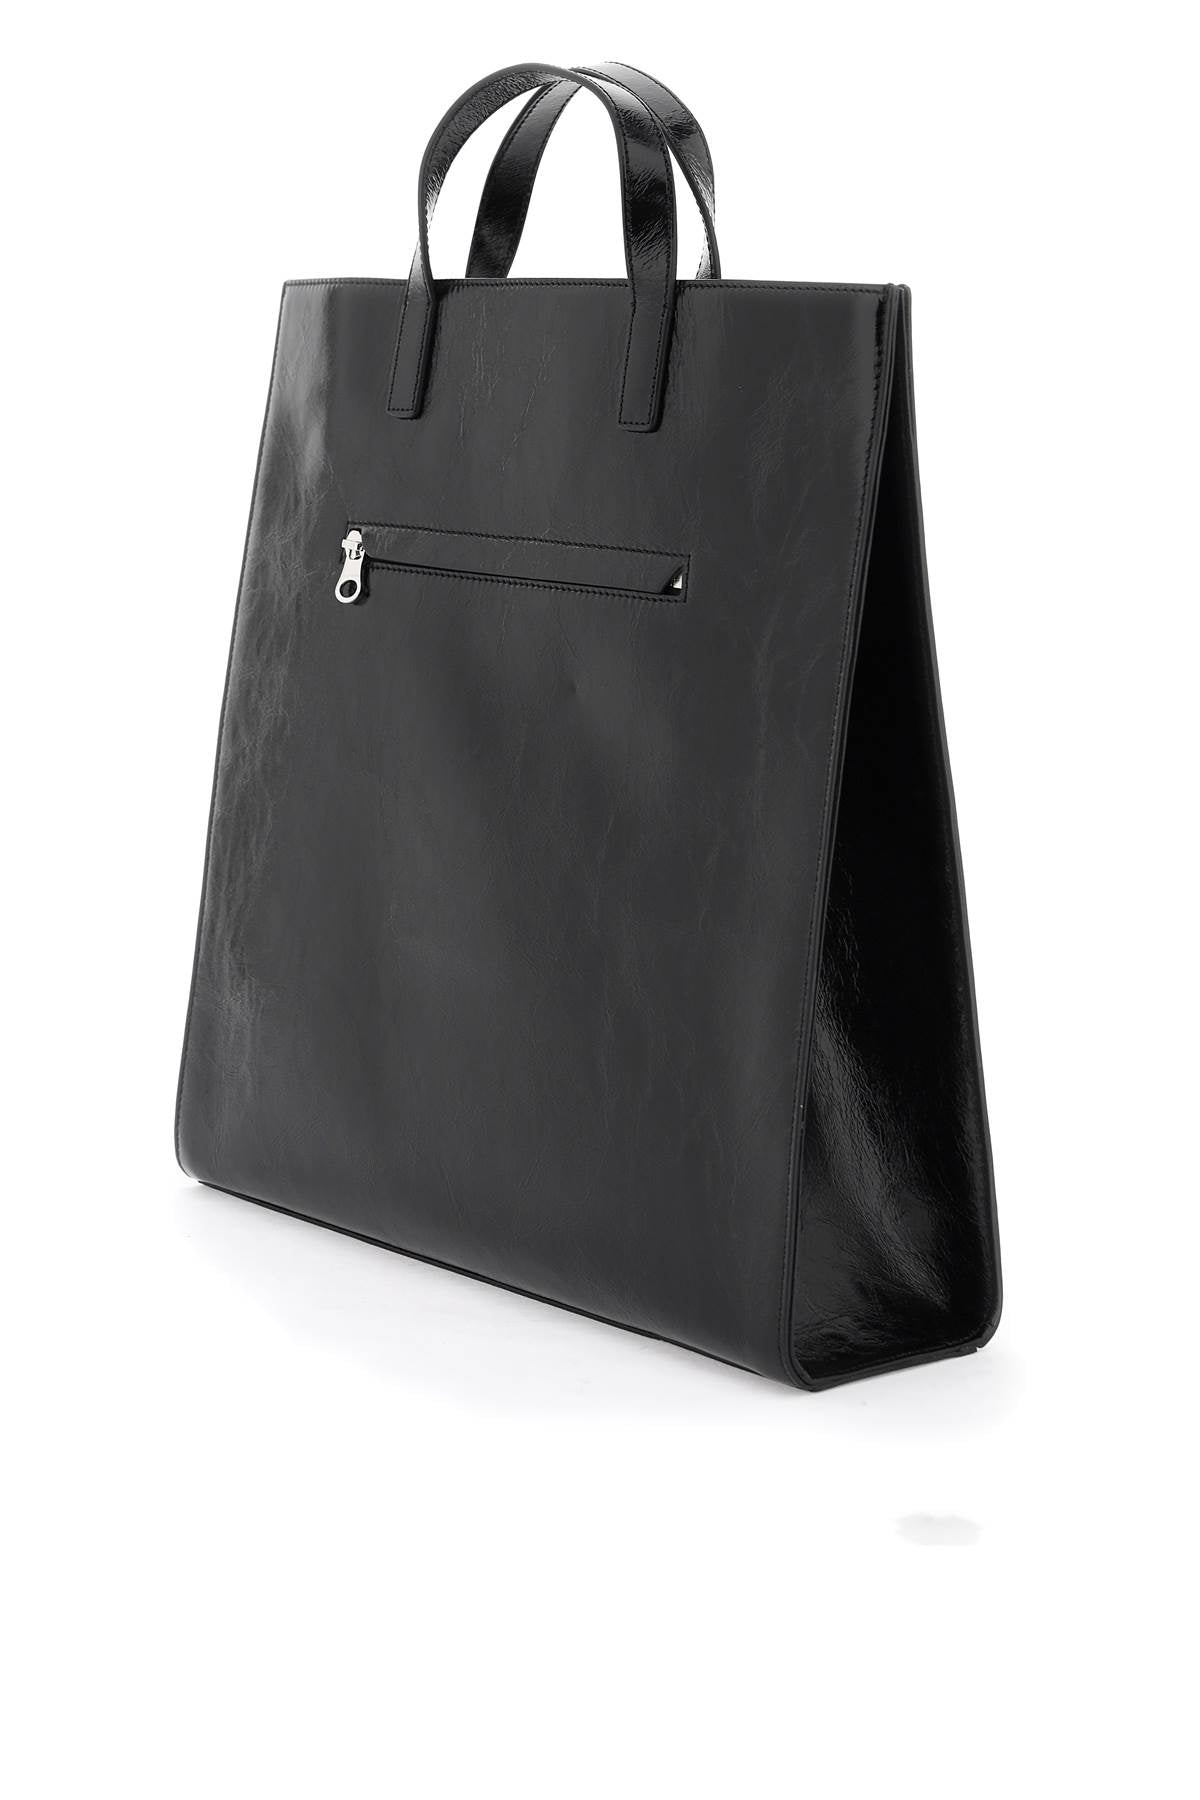 COURREGÈS Black Leather Tote Handbag for Women - SS24 Collection